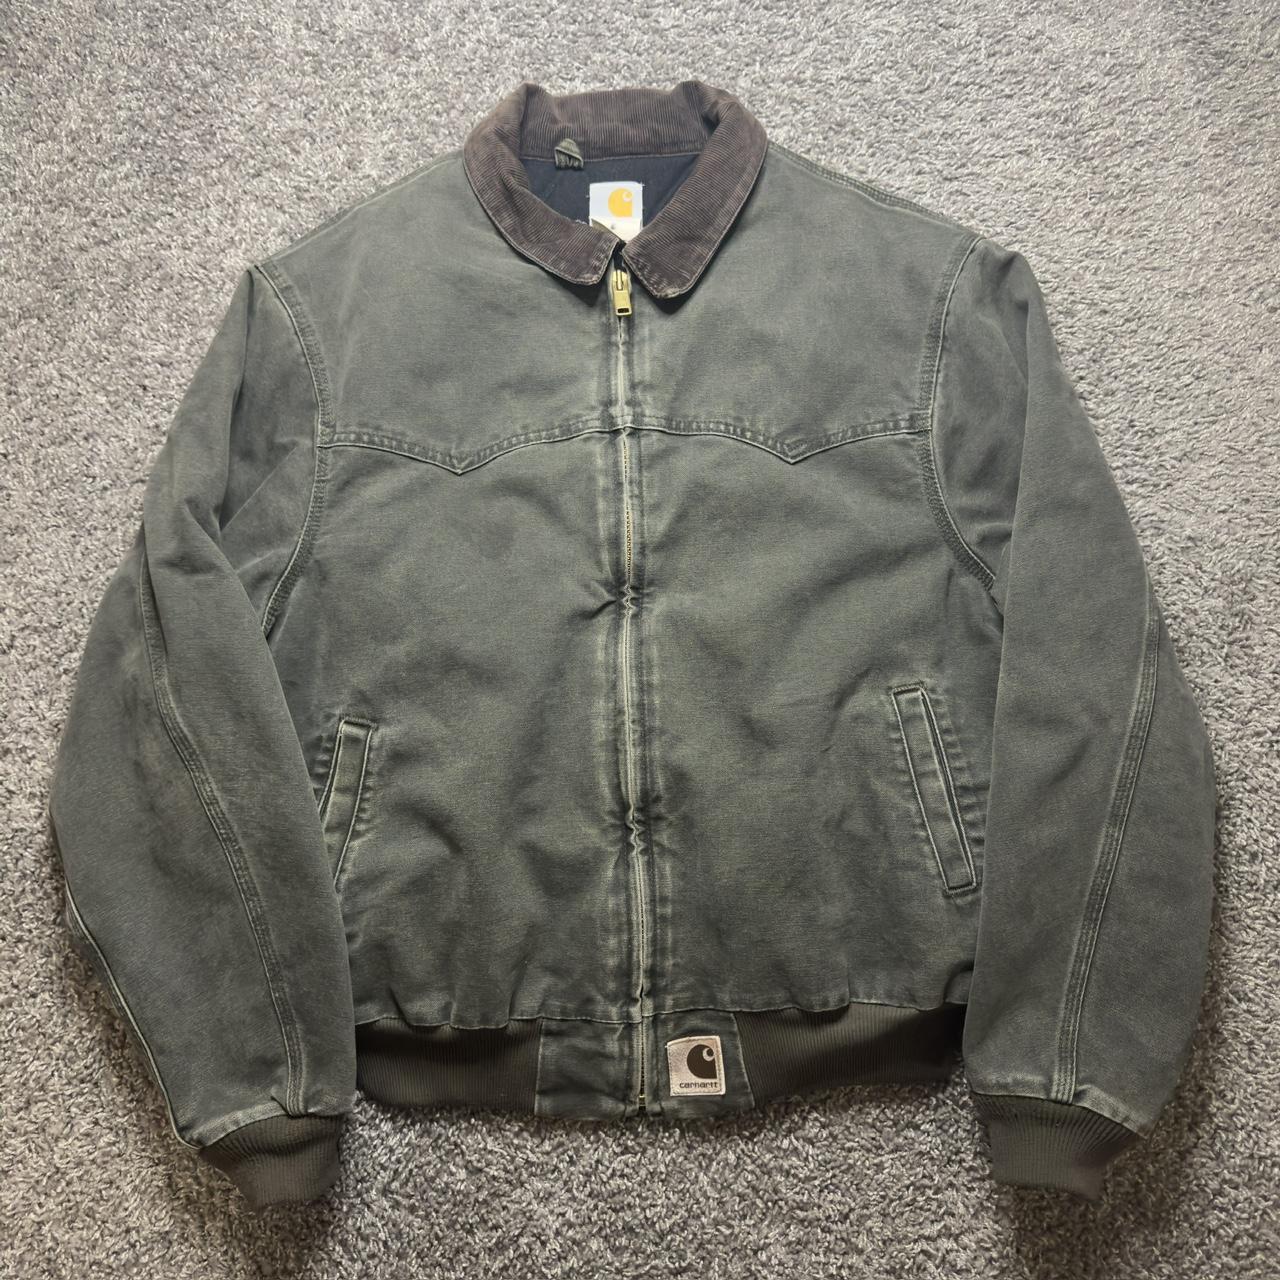 ANOTHER CARHARTT DROP! New carhartt and more to... - Depop